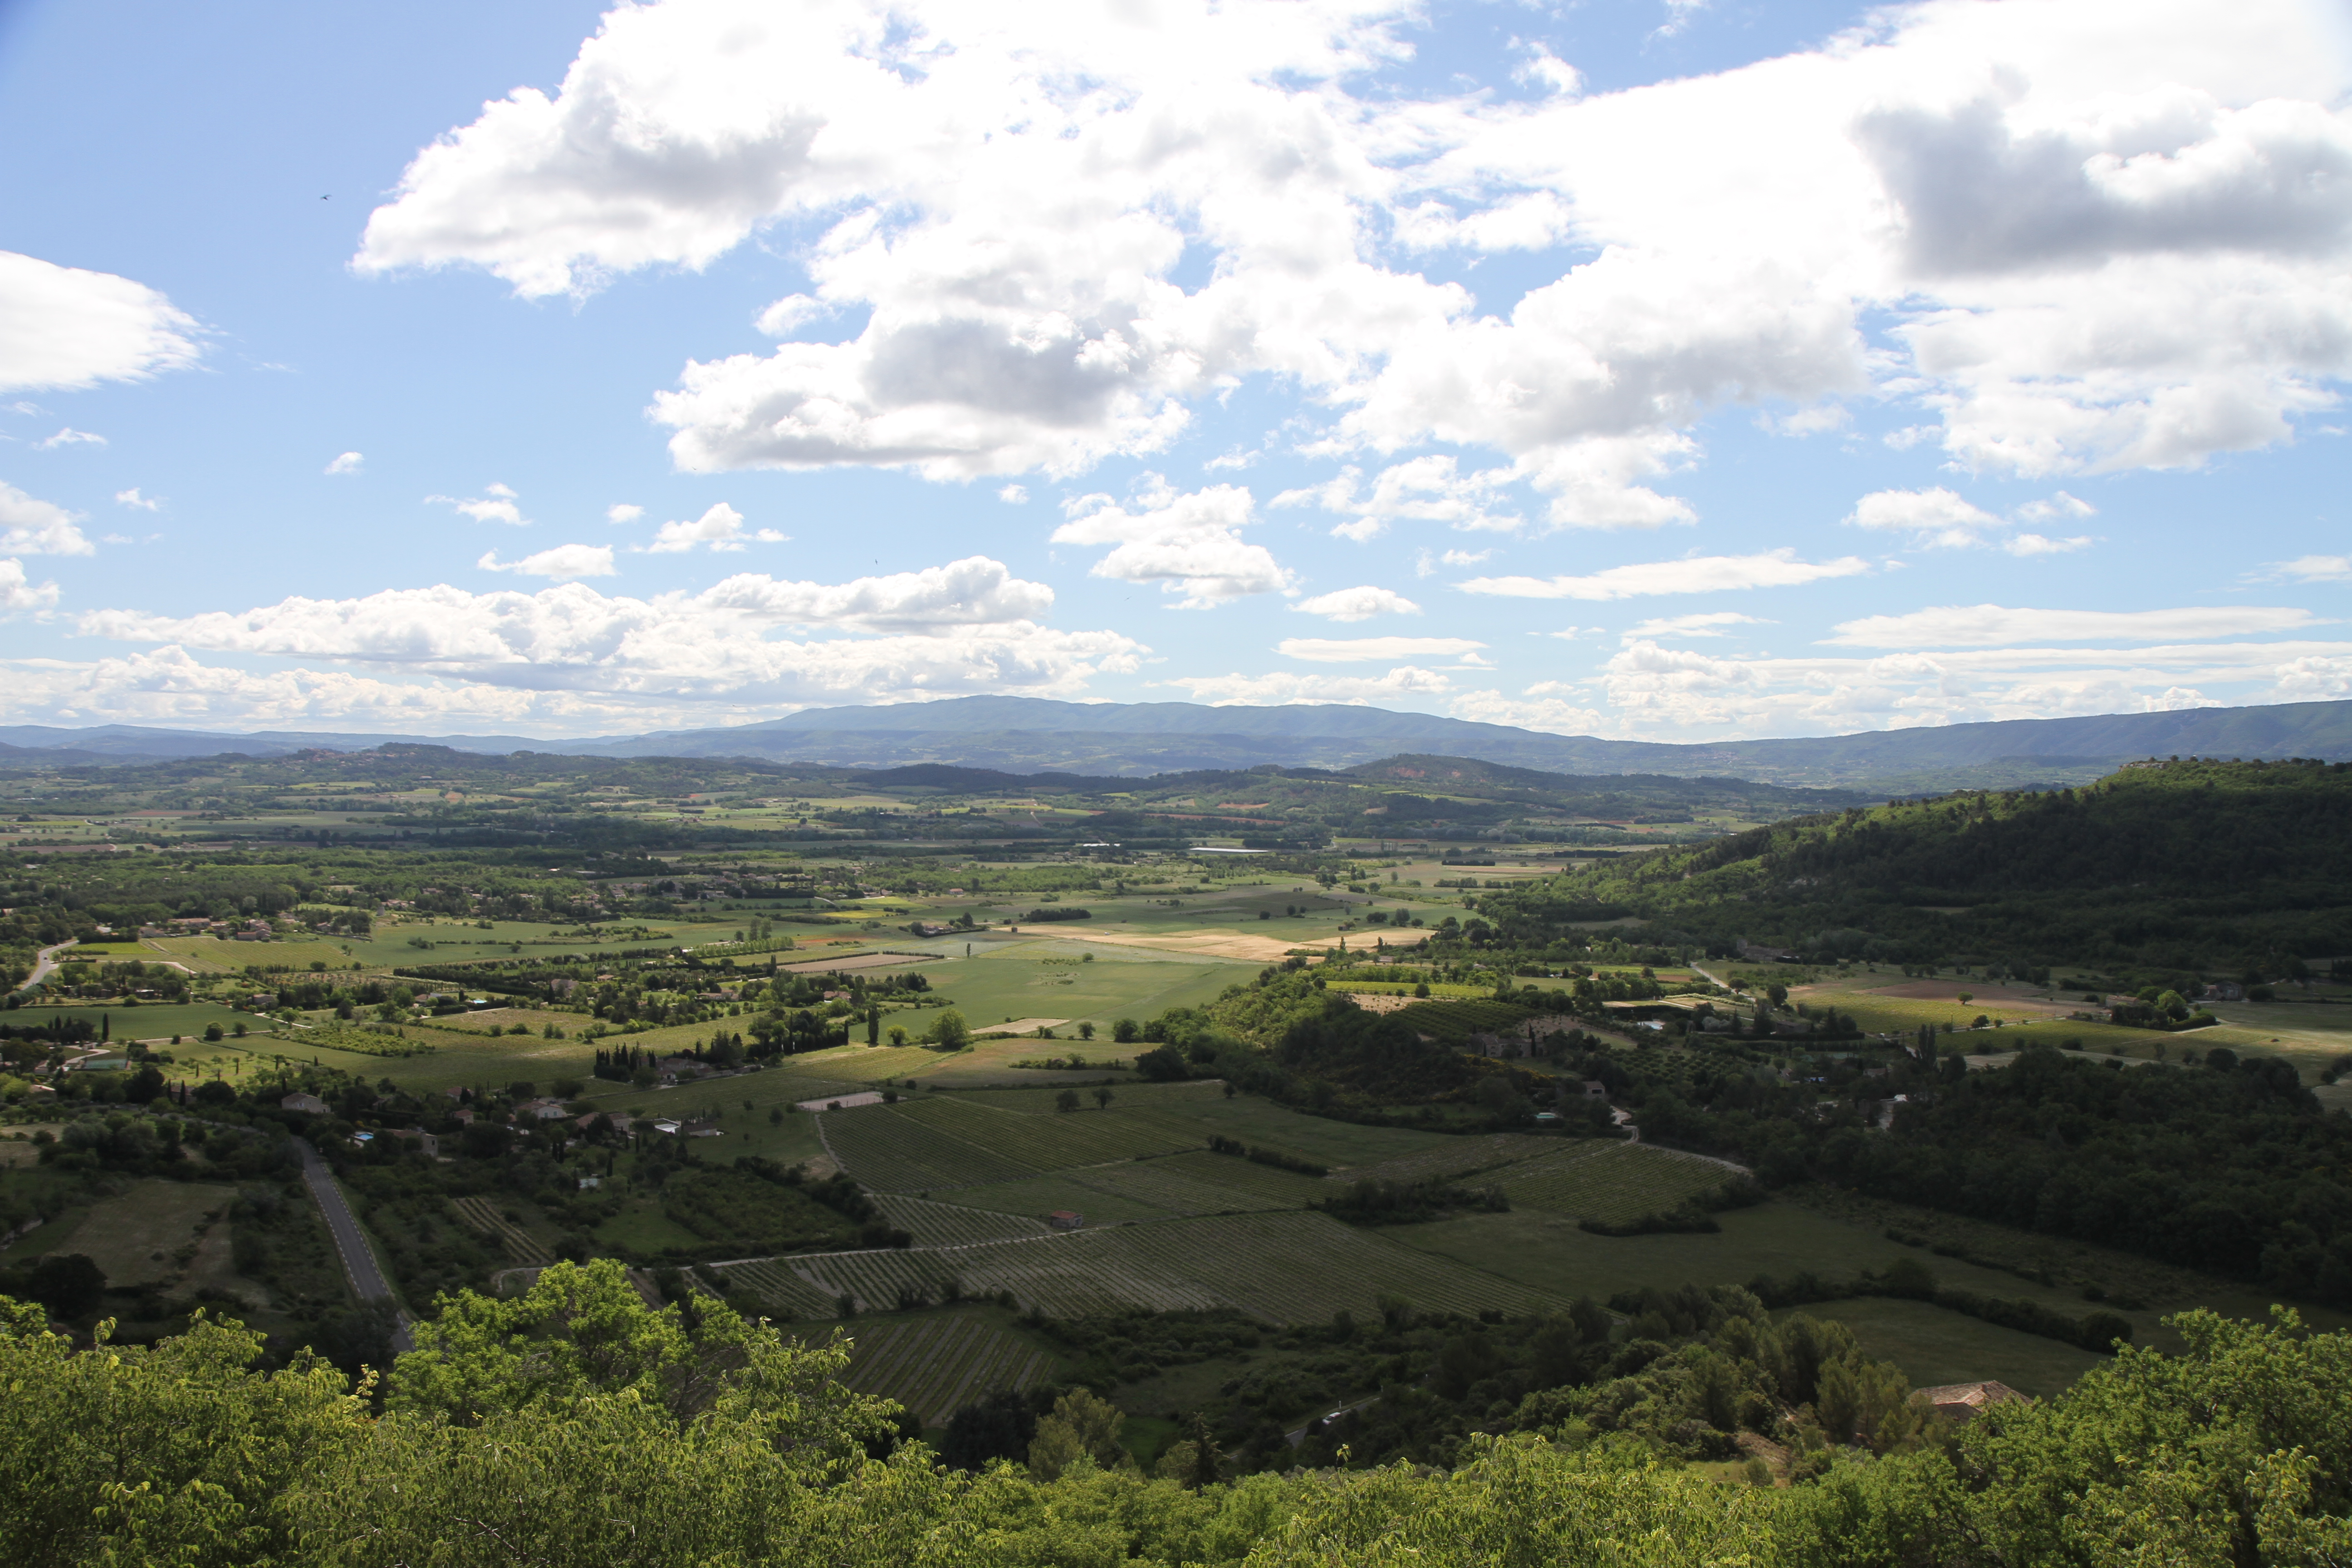 The view from the Gordes city wall of the valley below